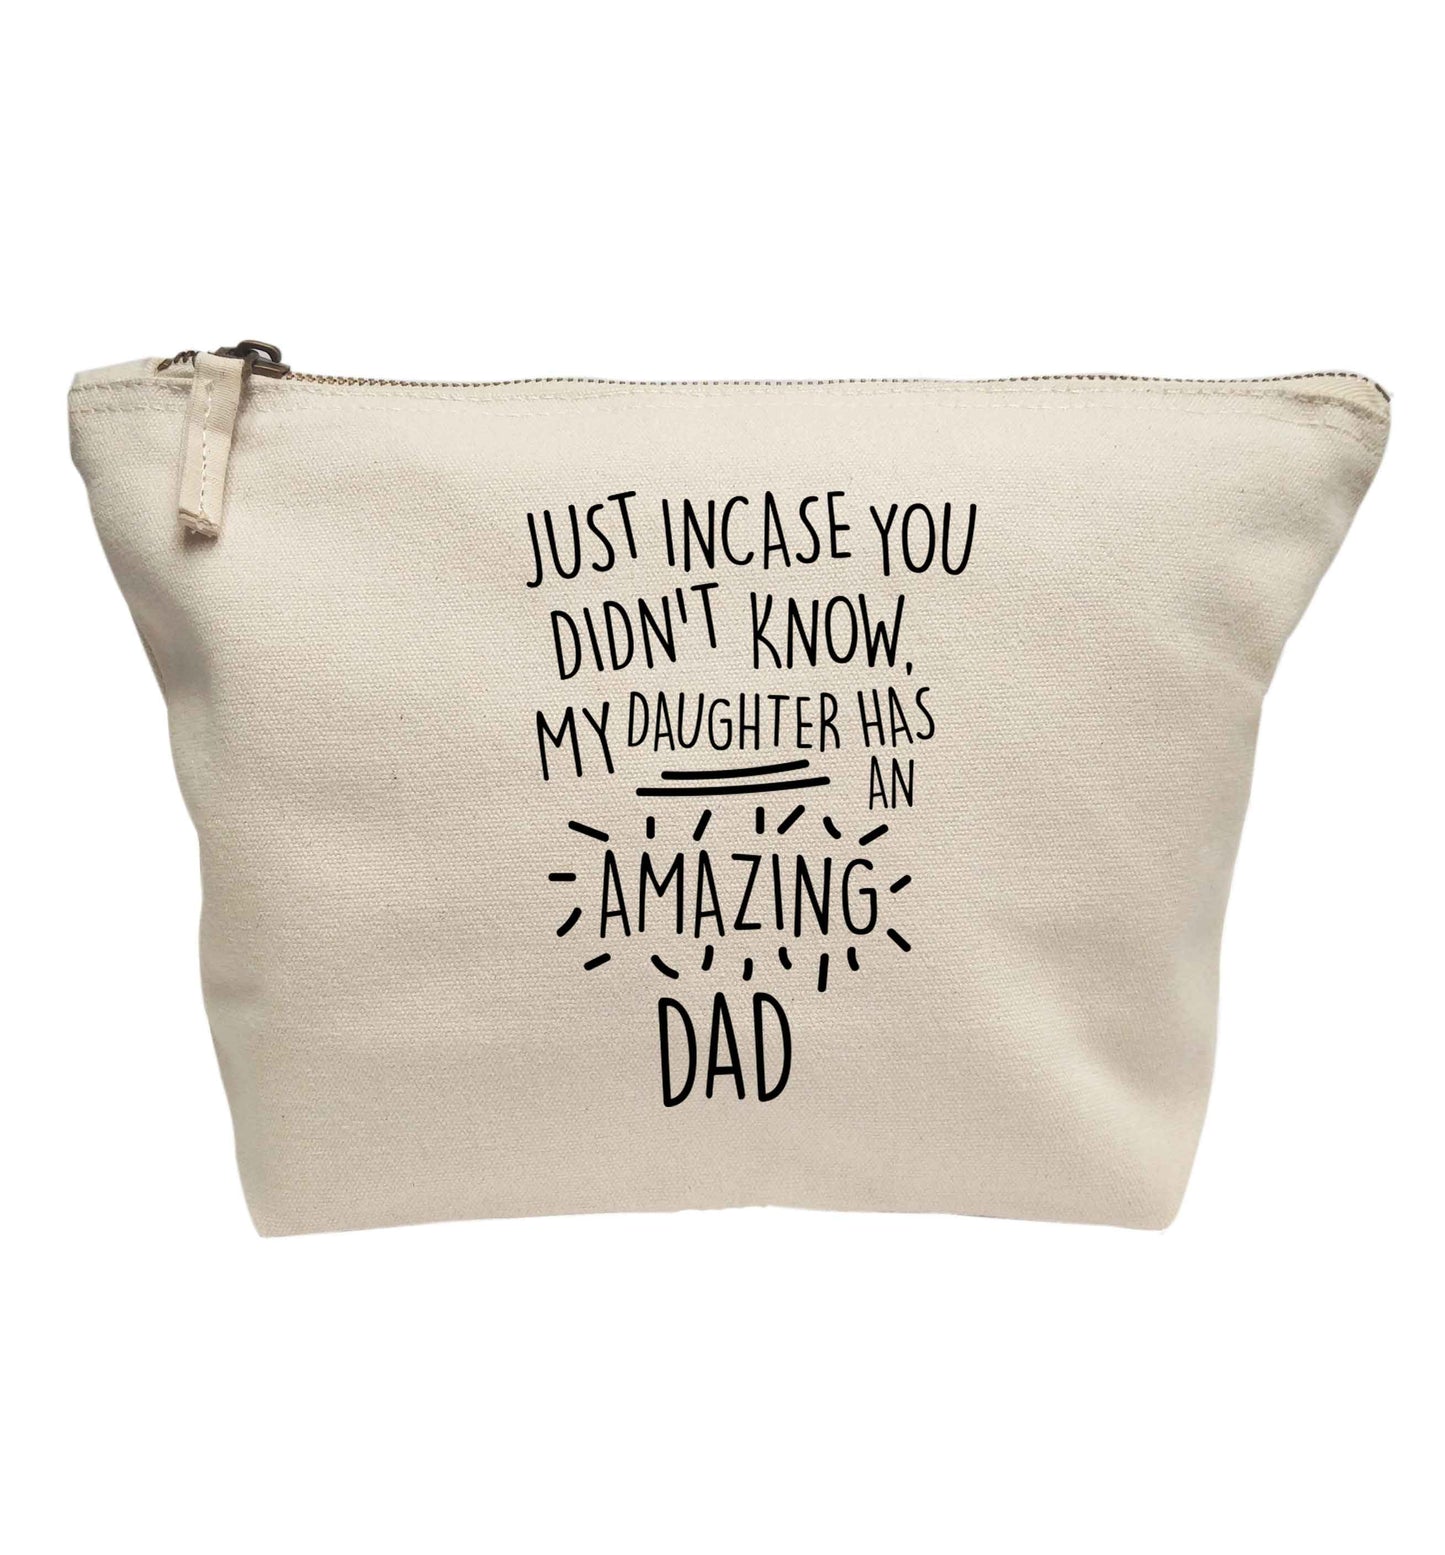 Just incase you didn't know my daughter has an amazing dad | Makeup / wash bag